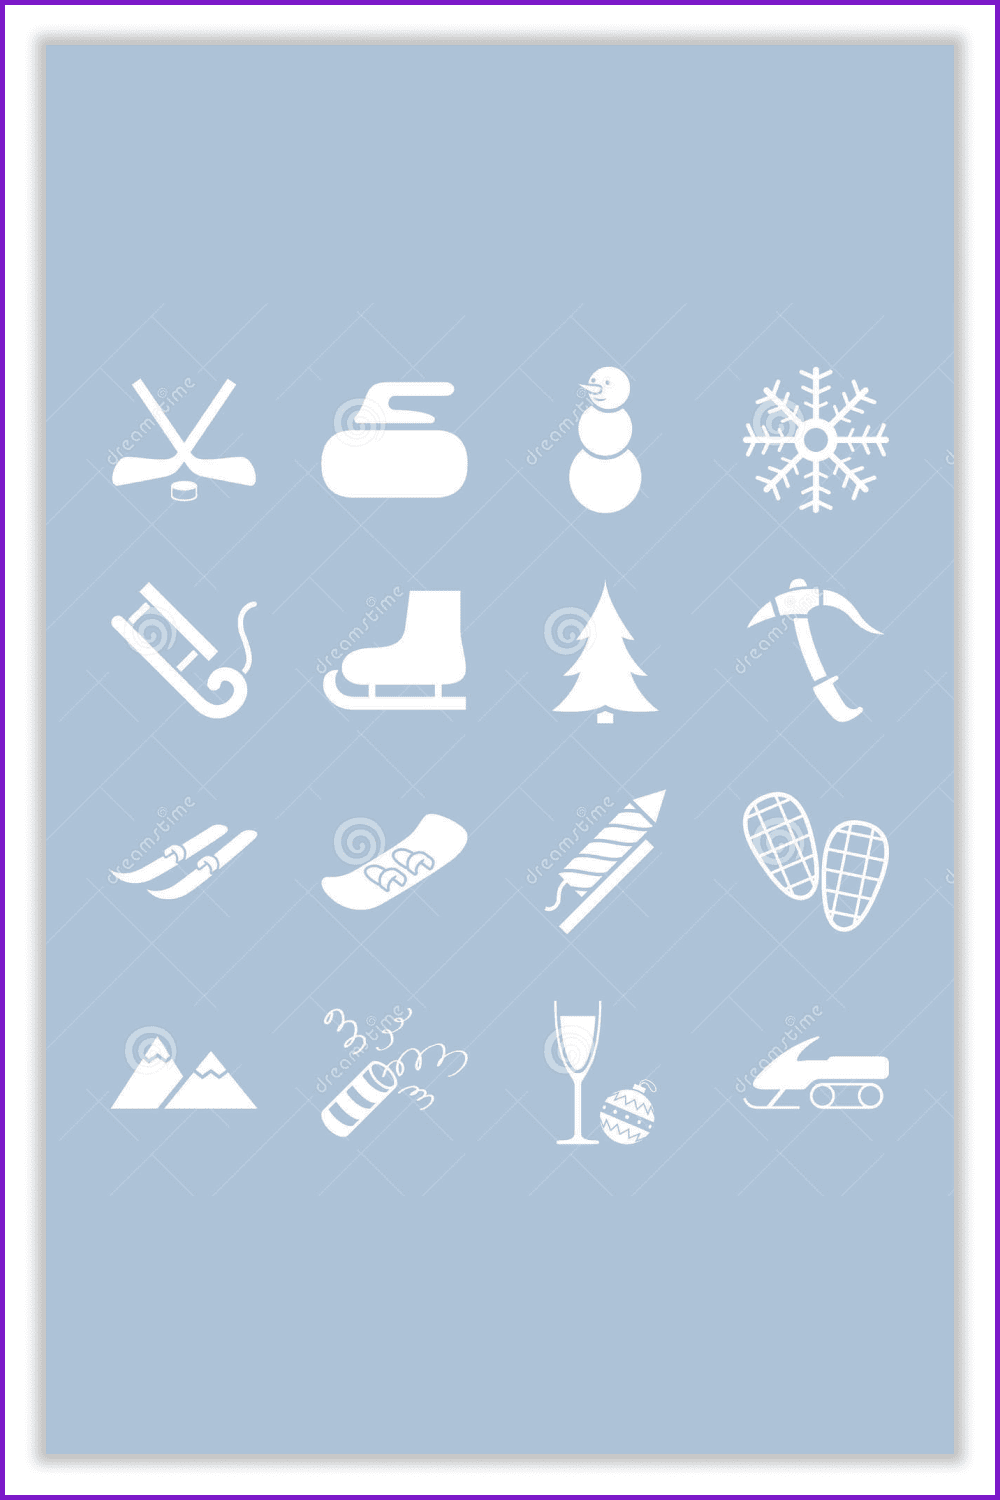 Collage of winter sports icons on gray background.